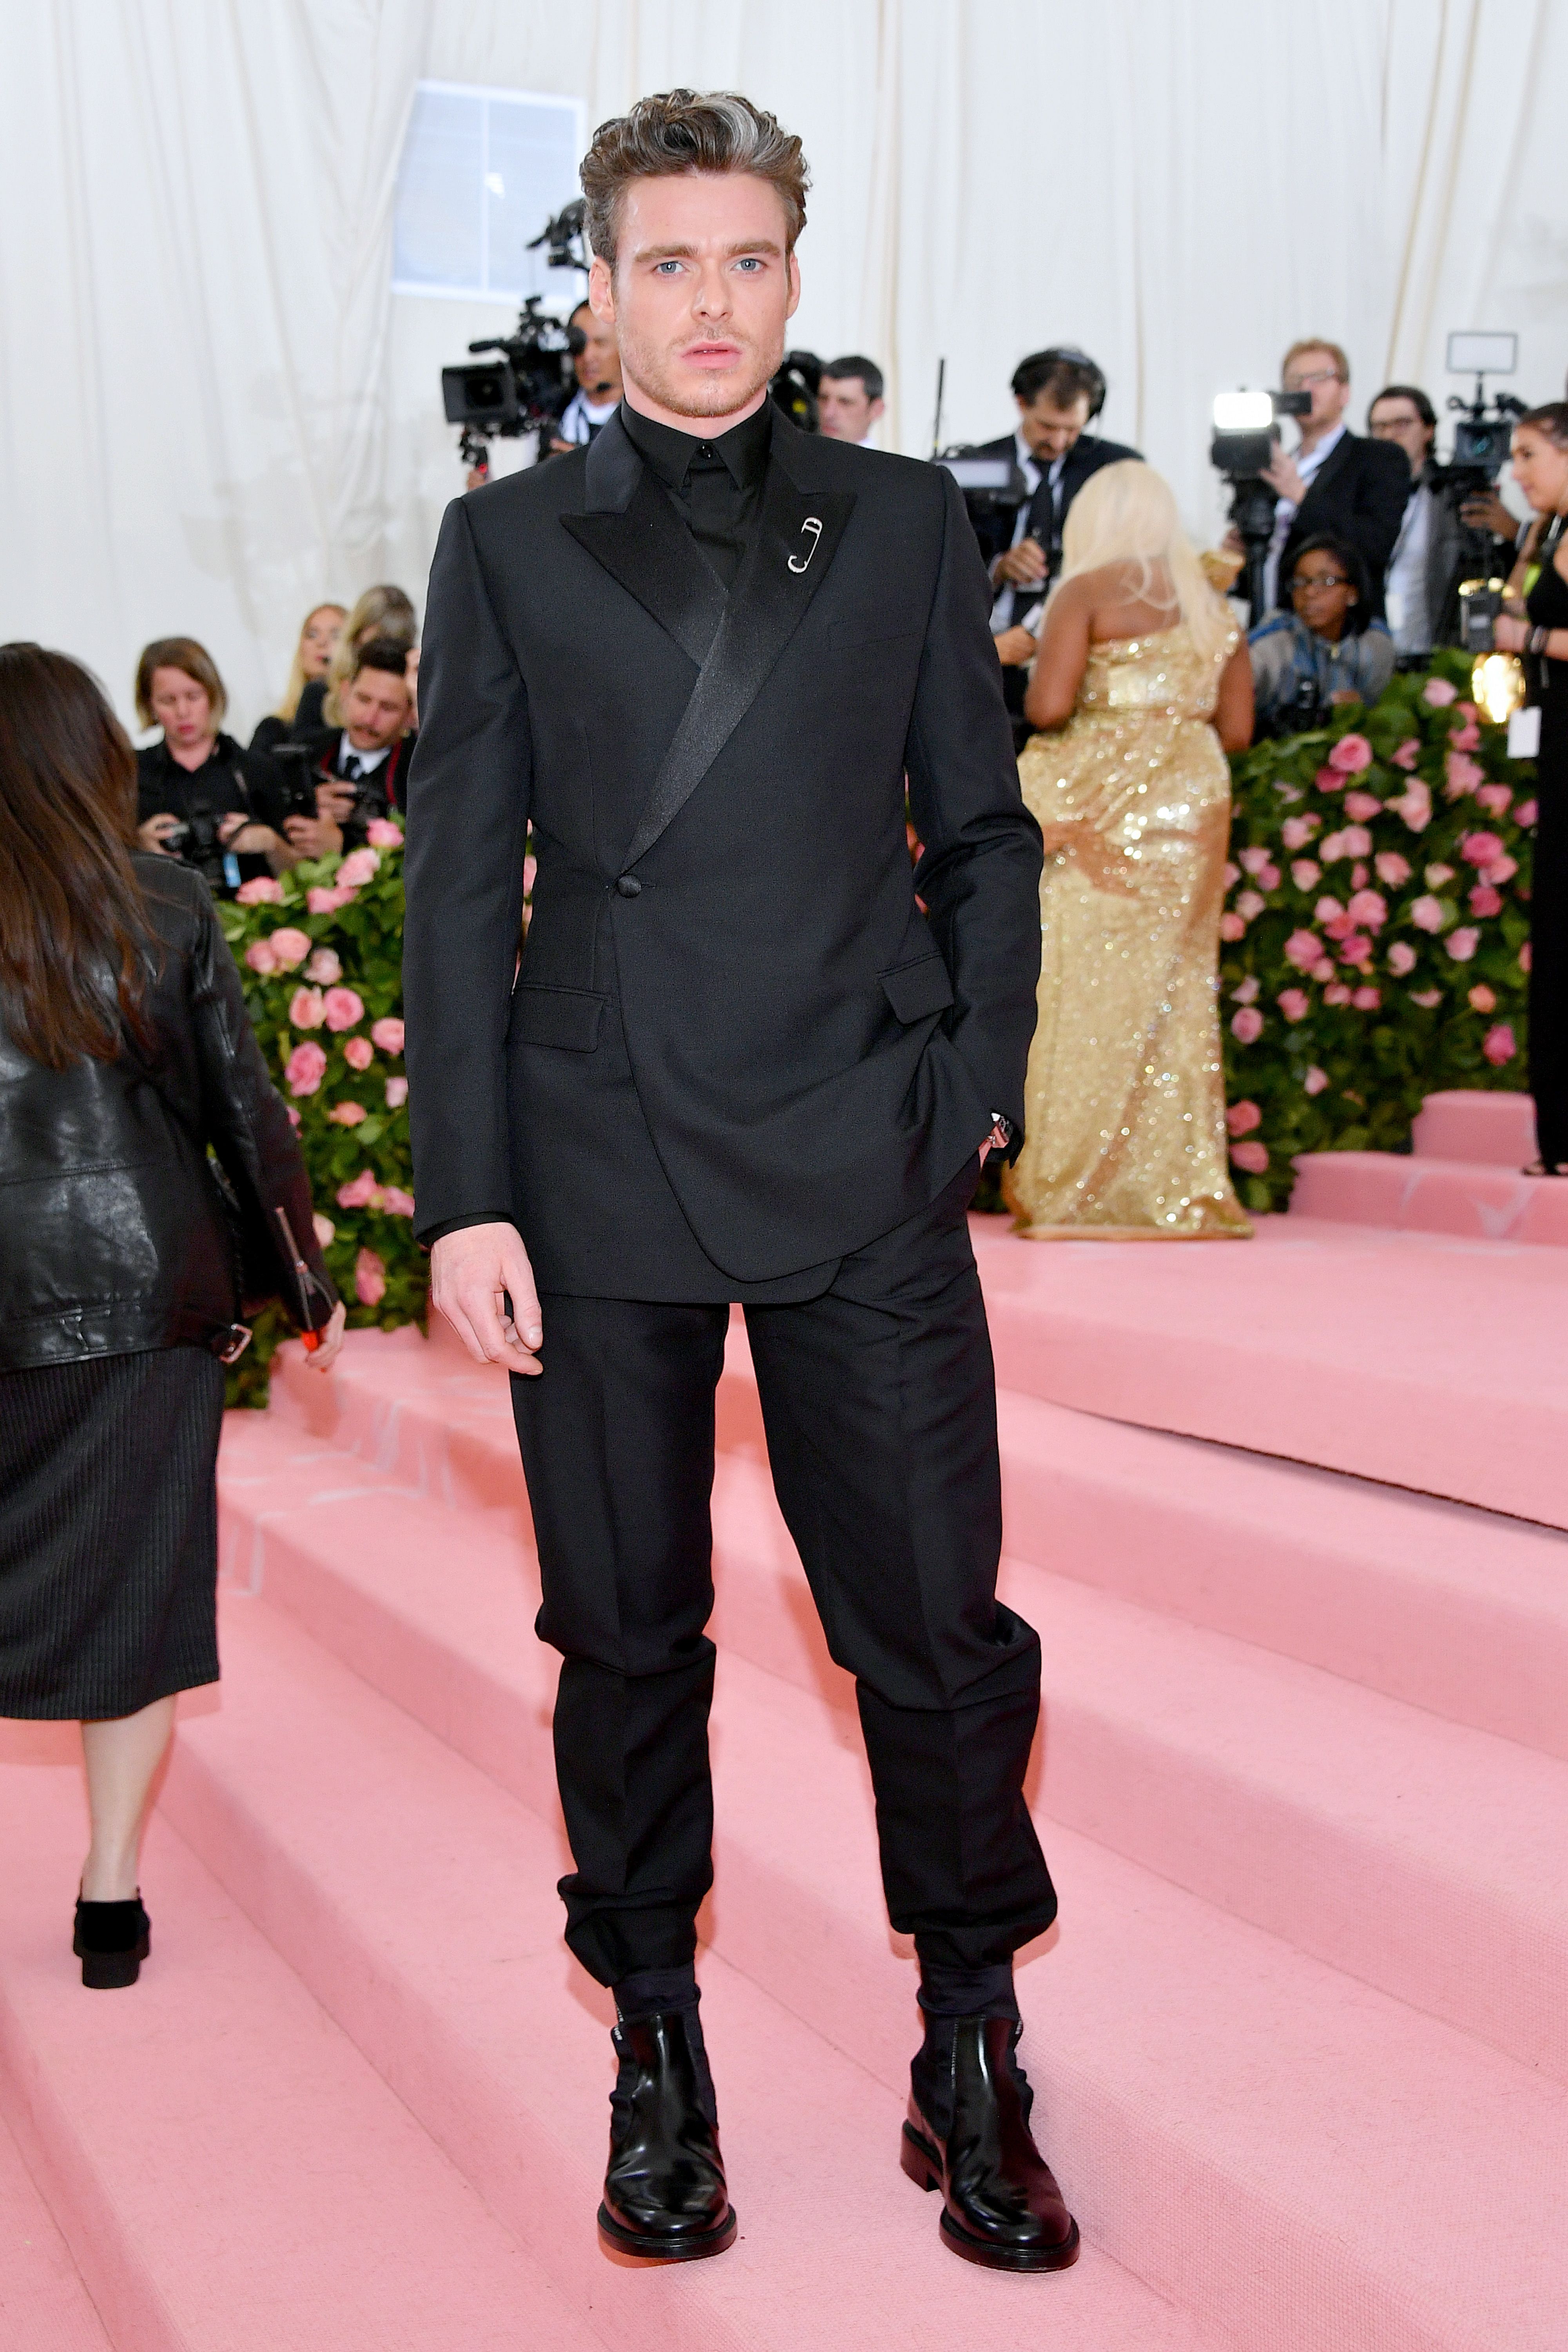 Richard Madden, Possible Bond Contender, at the 2019 Met Gala in